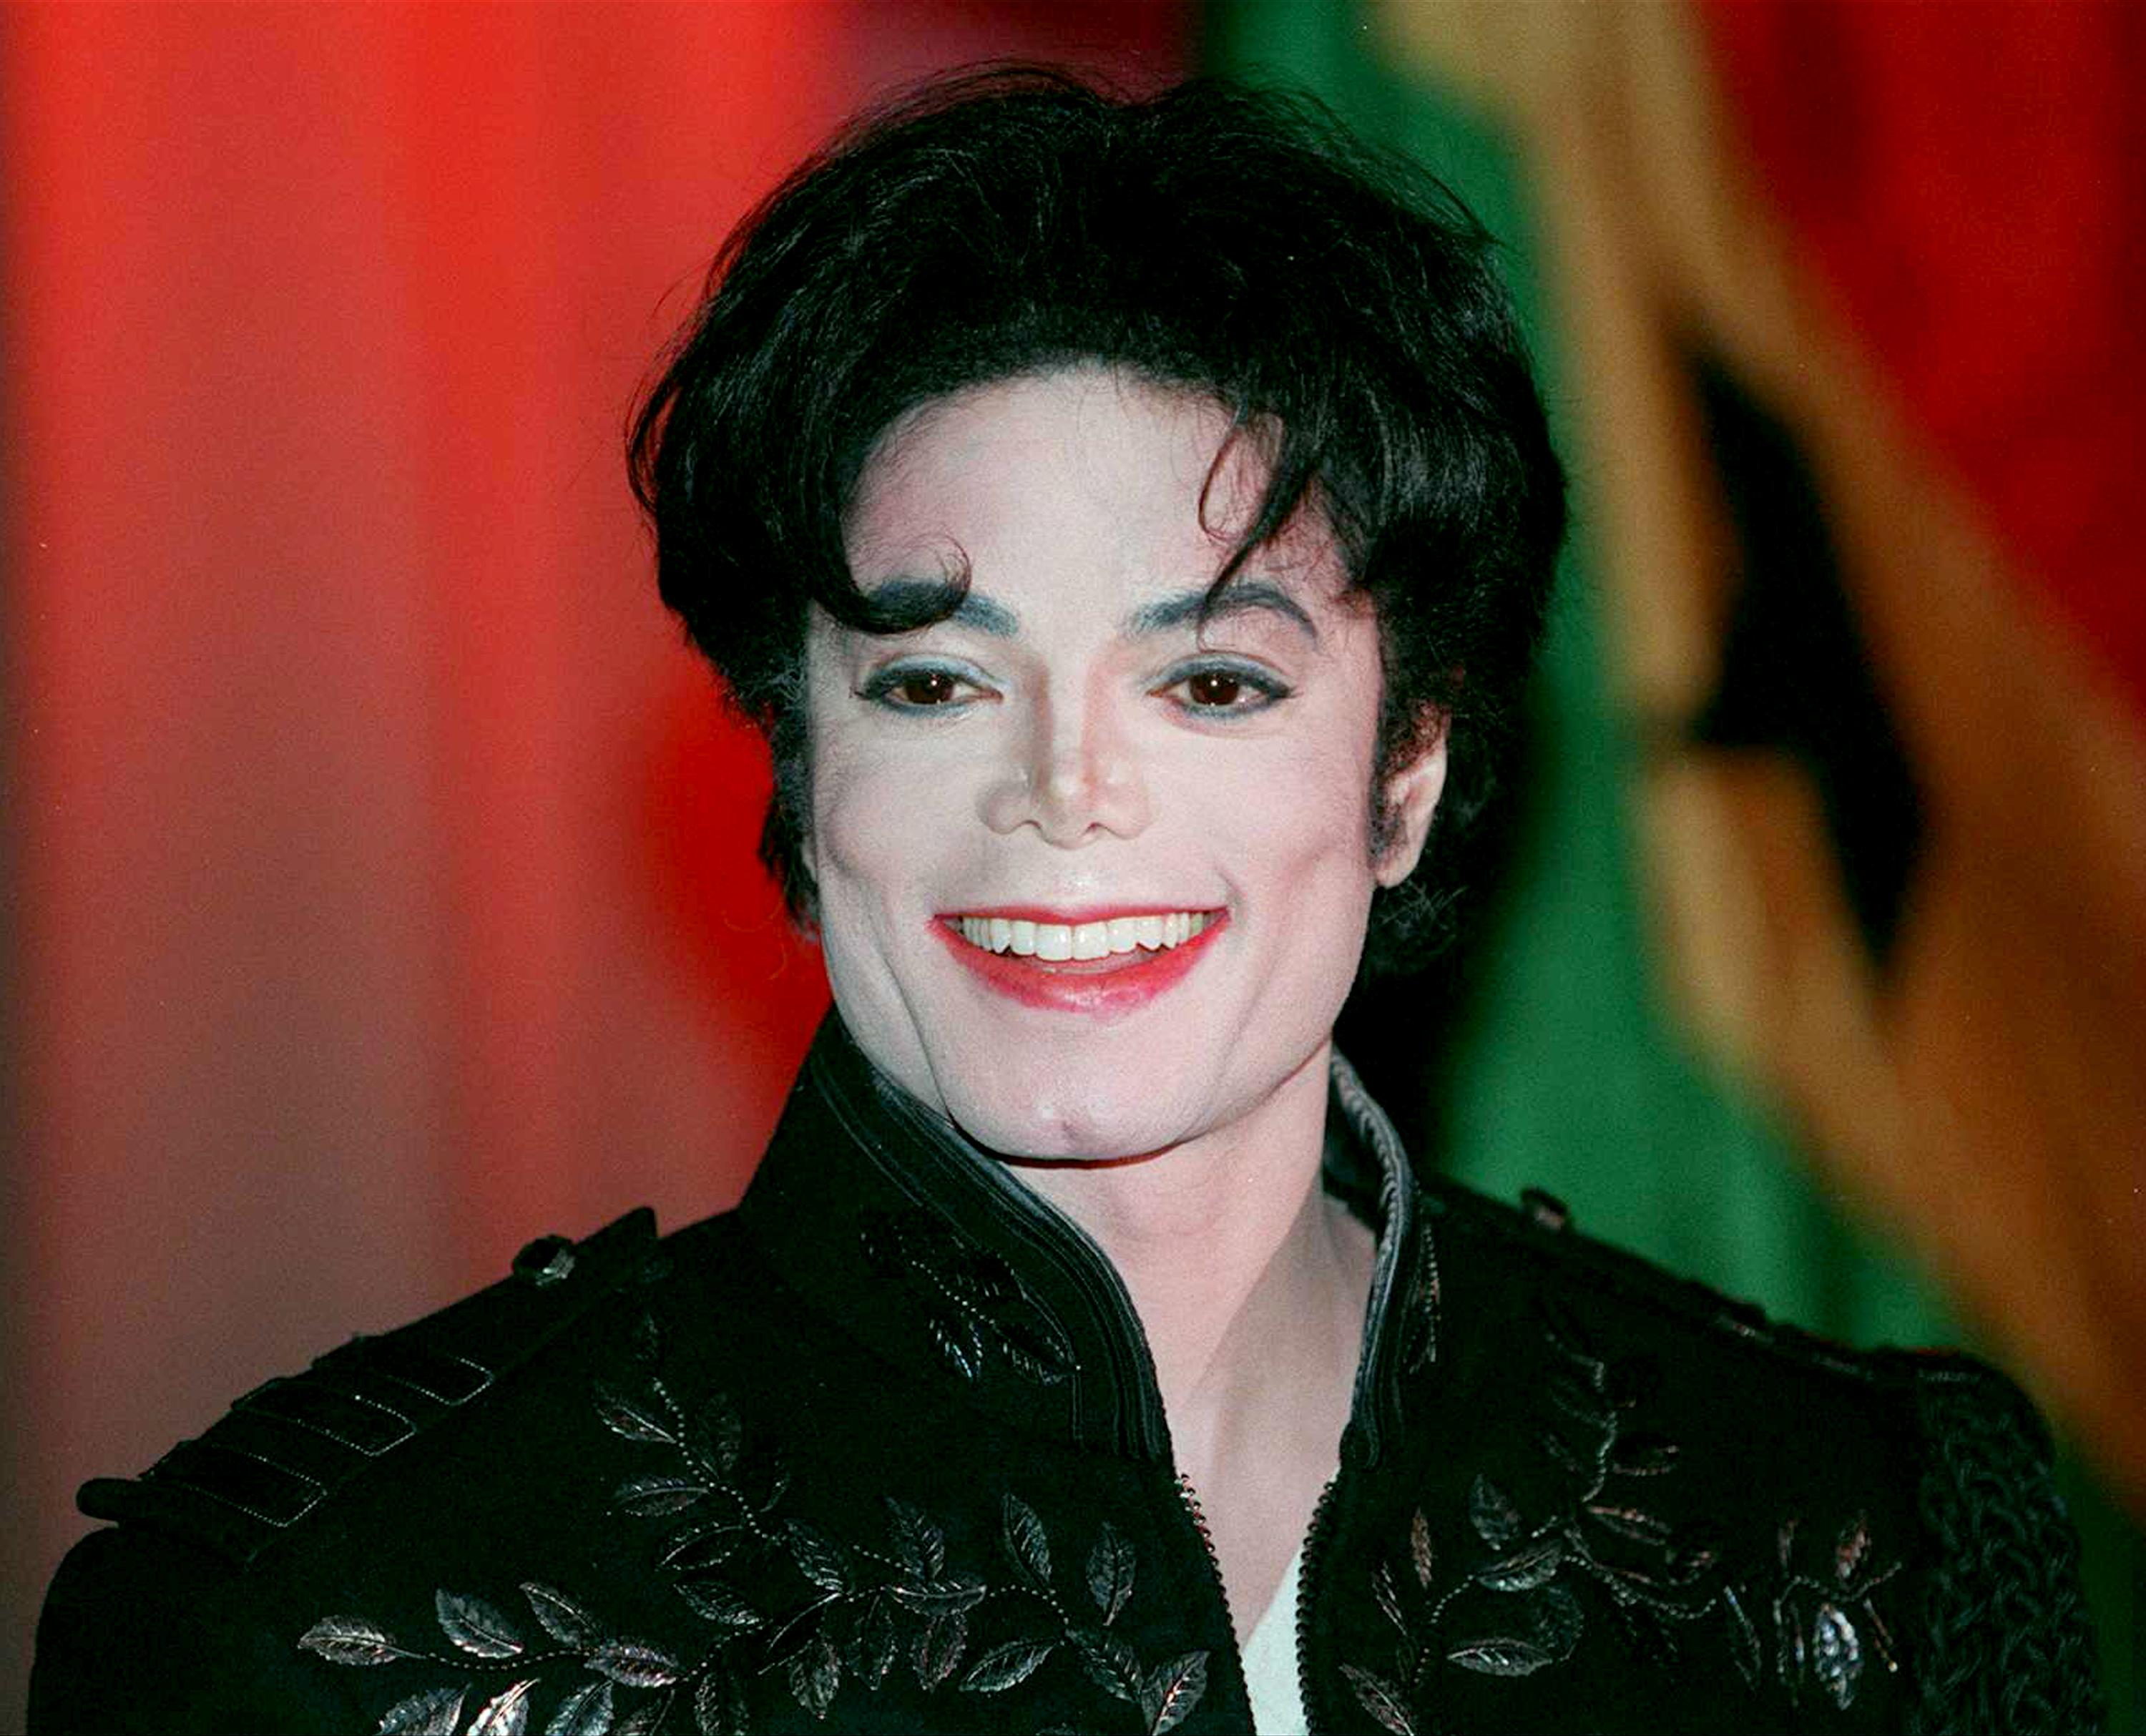 Michael Jackson in 1995 | Source: Getty Images